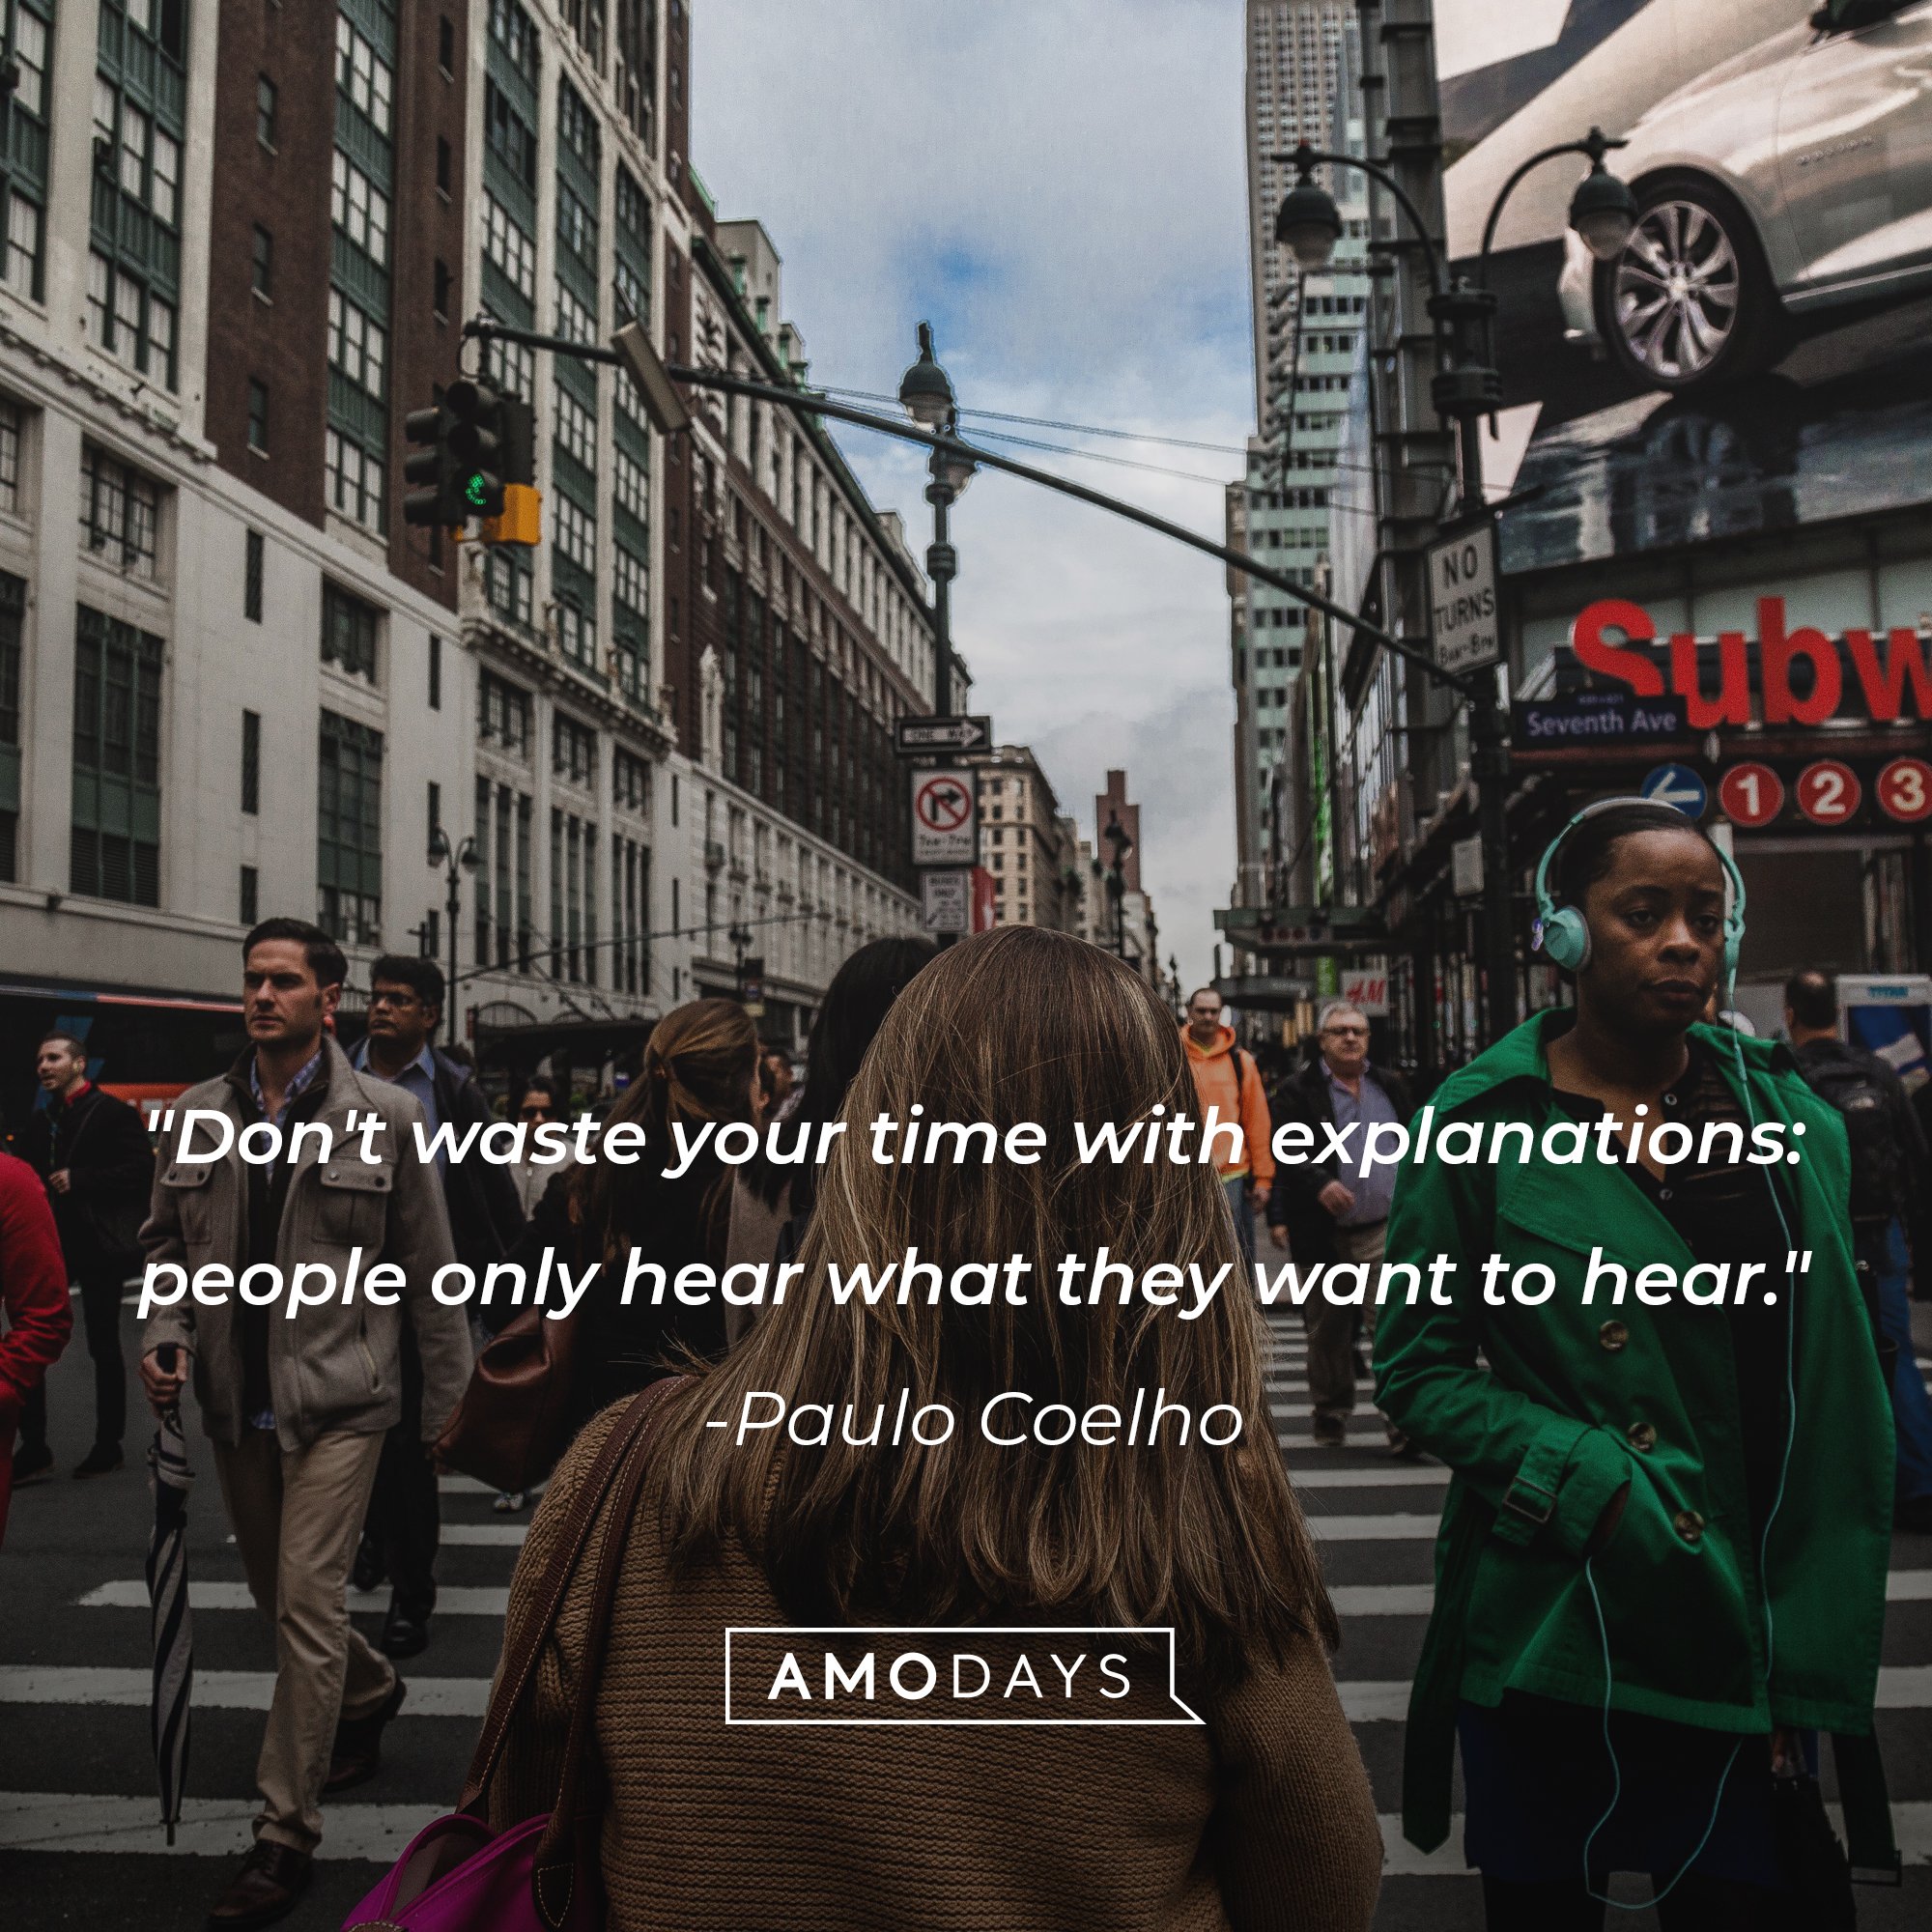 Paulo Coelho’s quote: "Don't waste your time with explanations: people only hear what they want to hear." | Image: AmoDays 